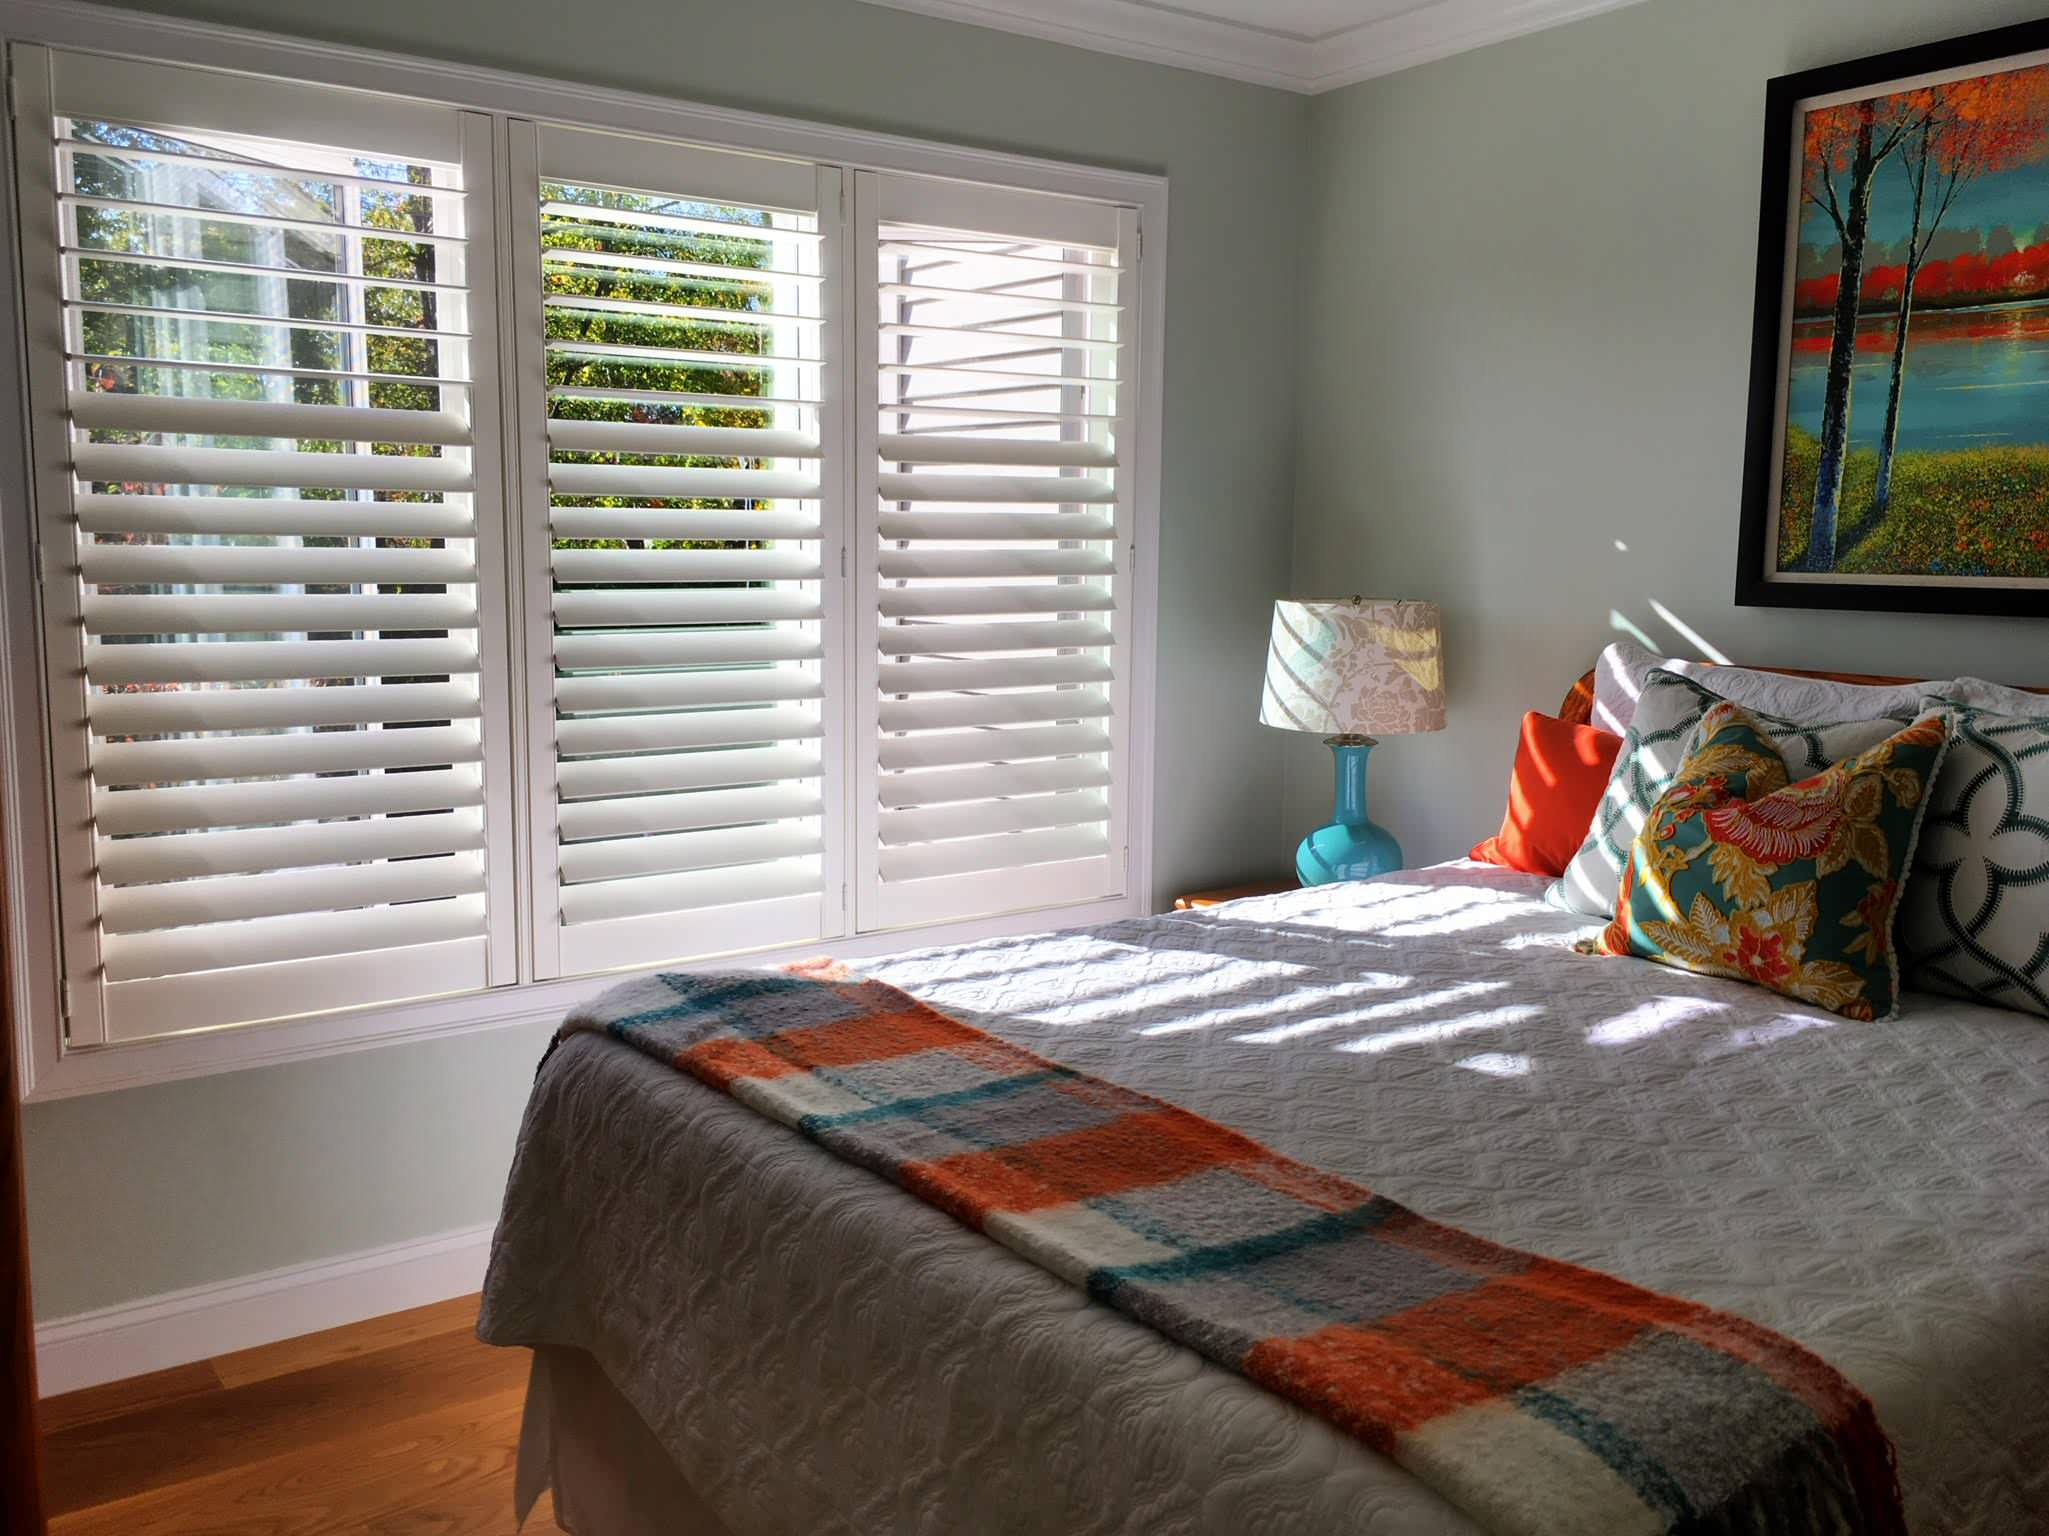 Beauty and Function with Shutters